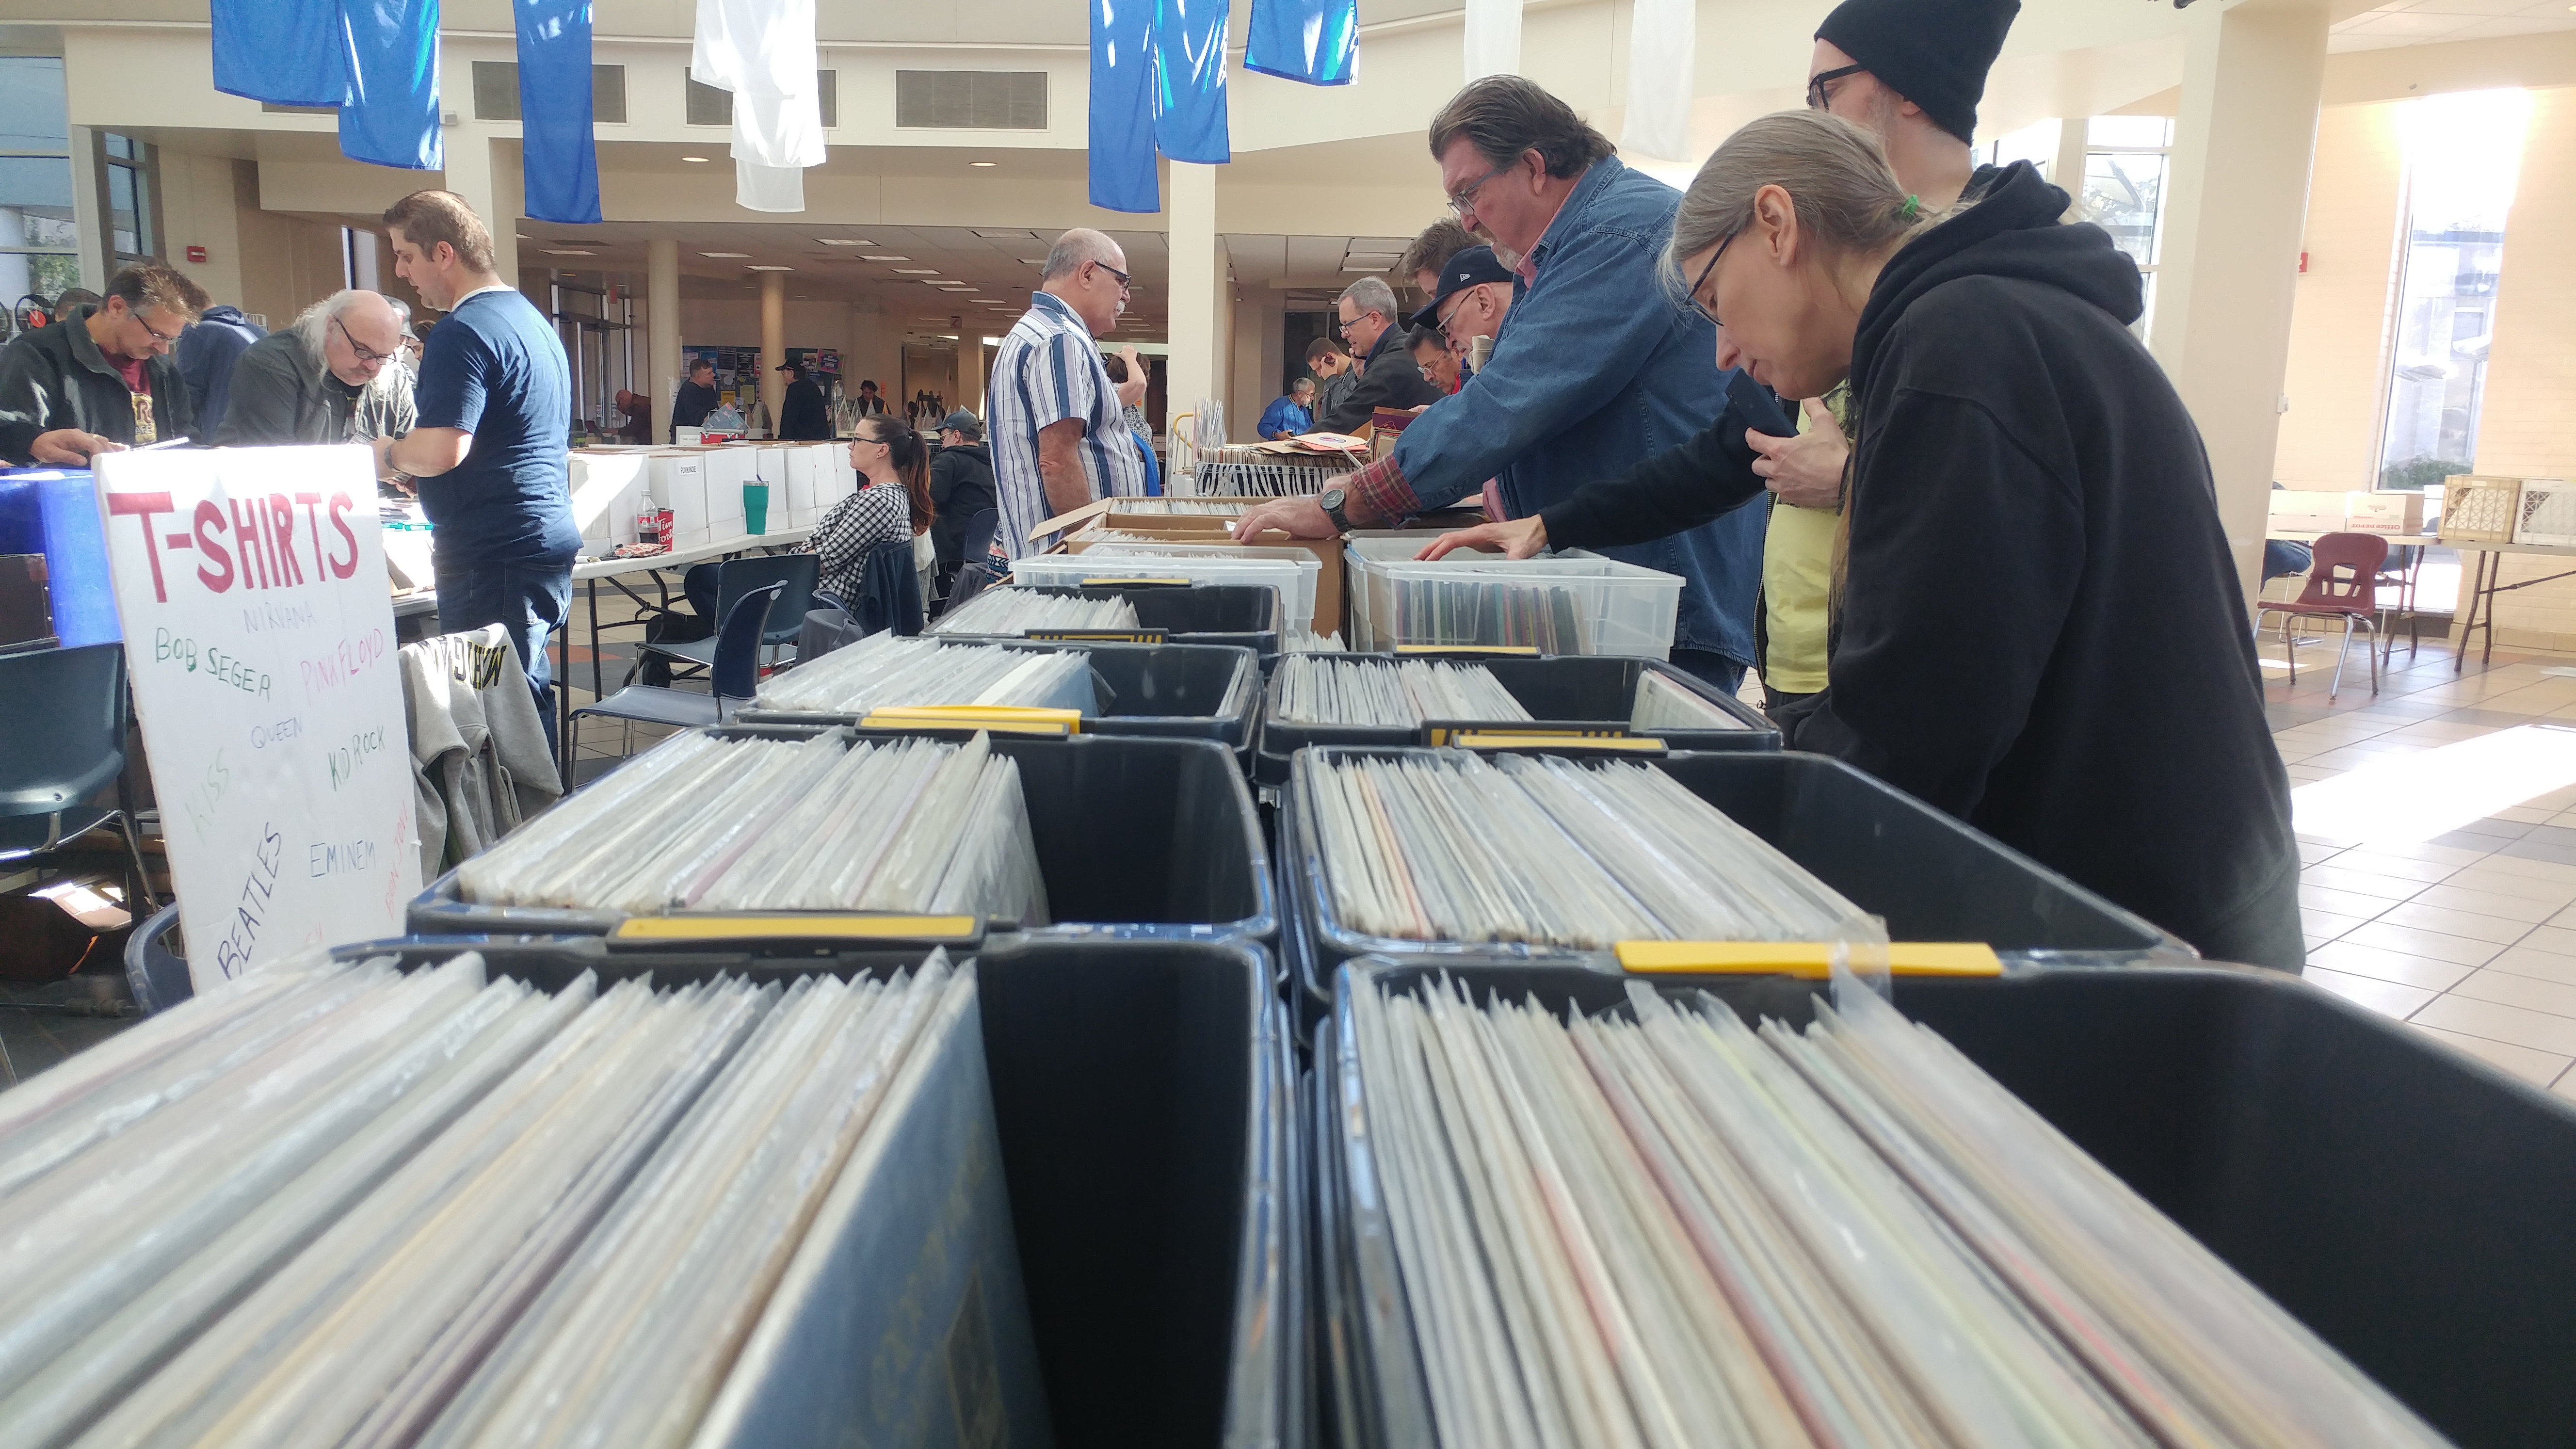 Photo shows several people looking through boxes of records